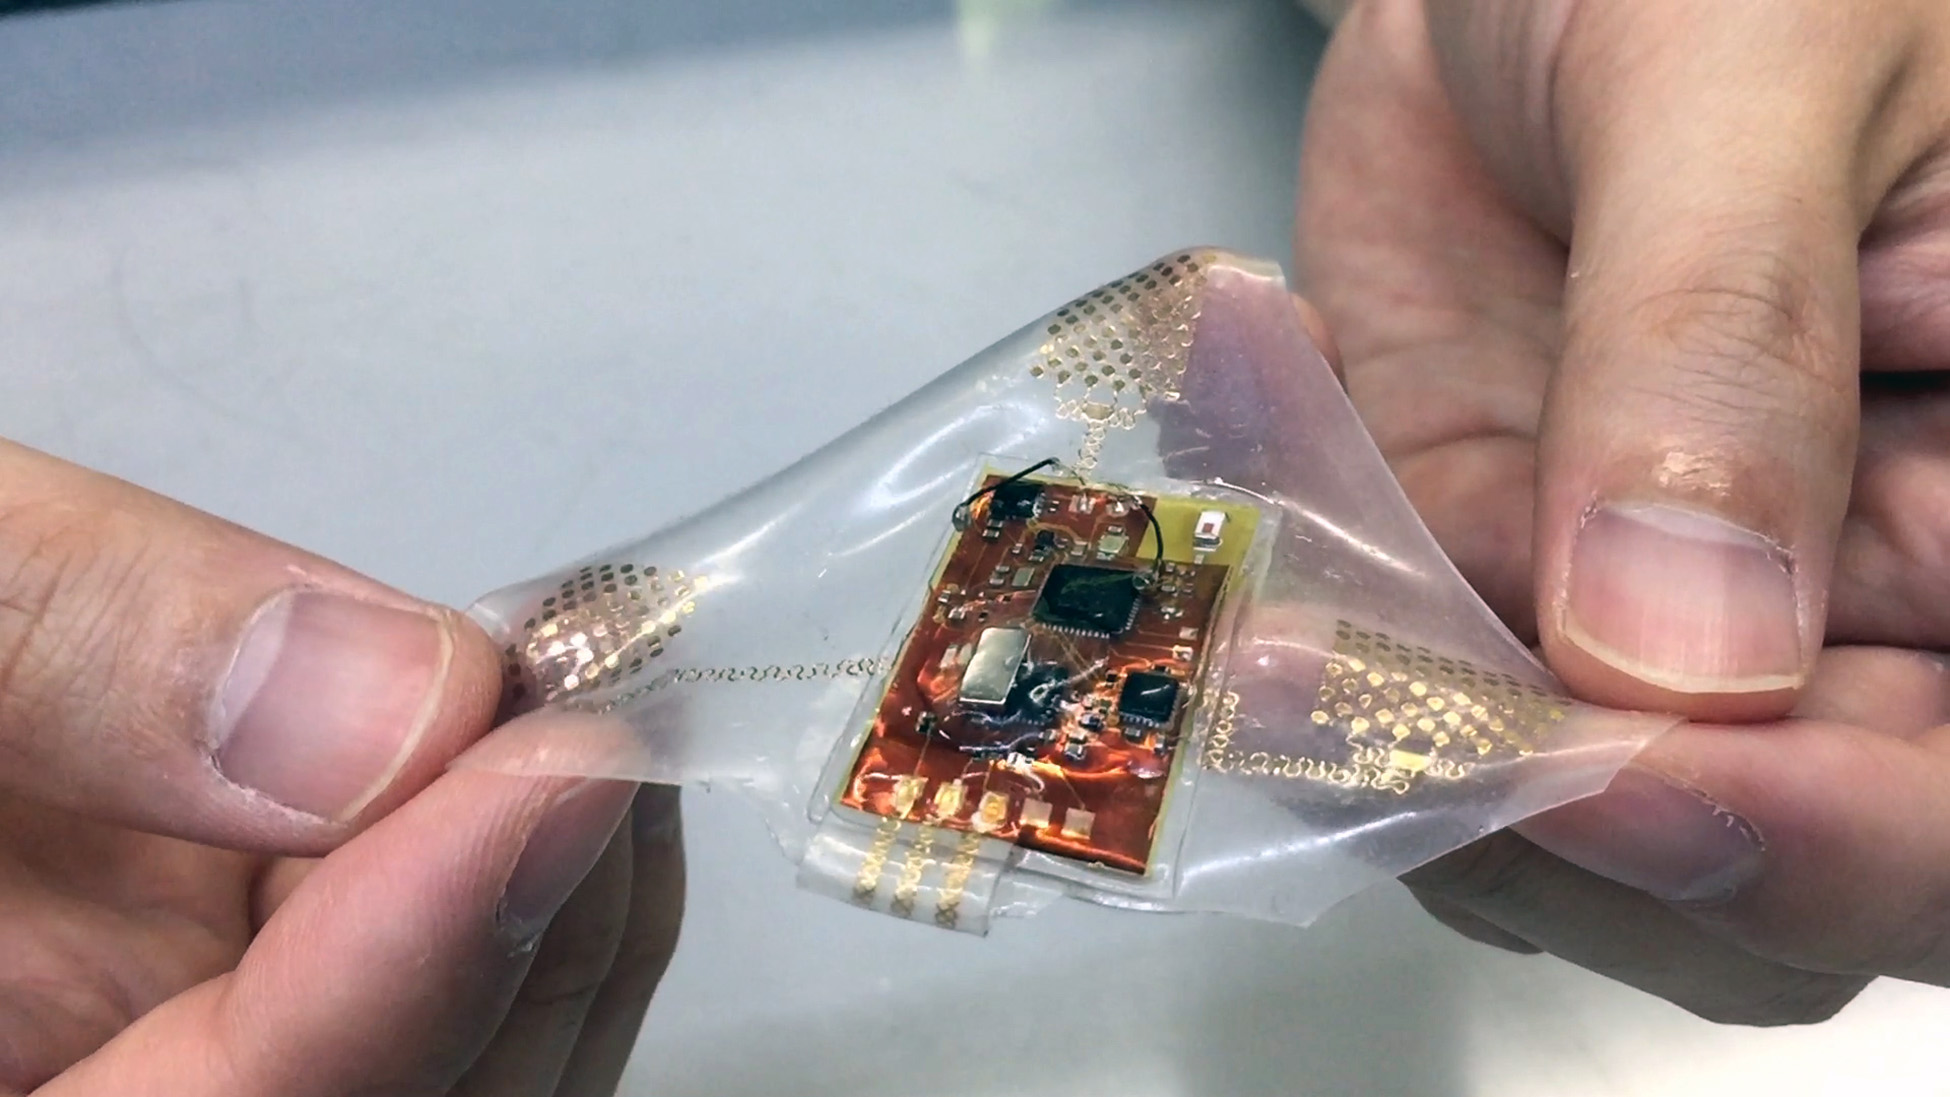 A wireless, wearable monitor built with stretchable electronics could allow comfortable, long-term health monitoring of adults, babies and small children. (Photo: John Toon, Georgia Tech)